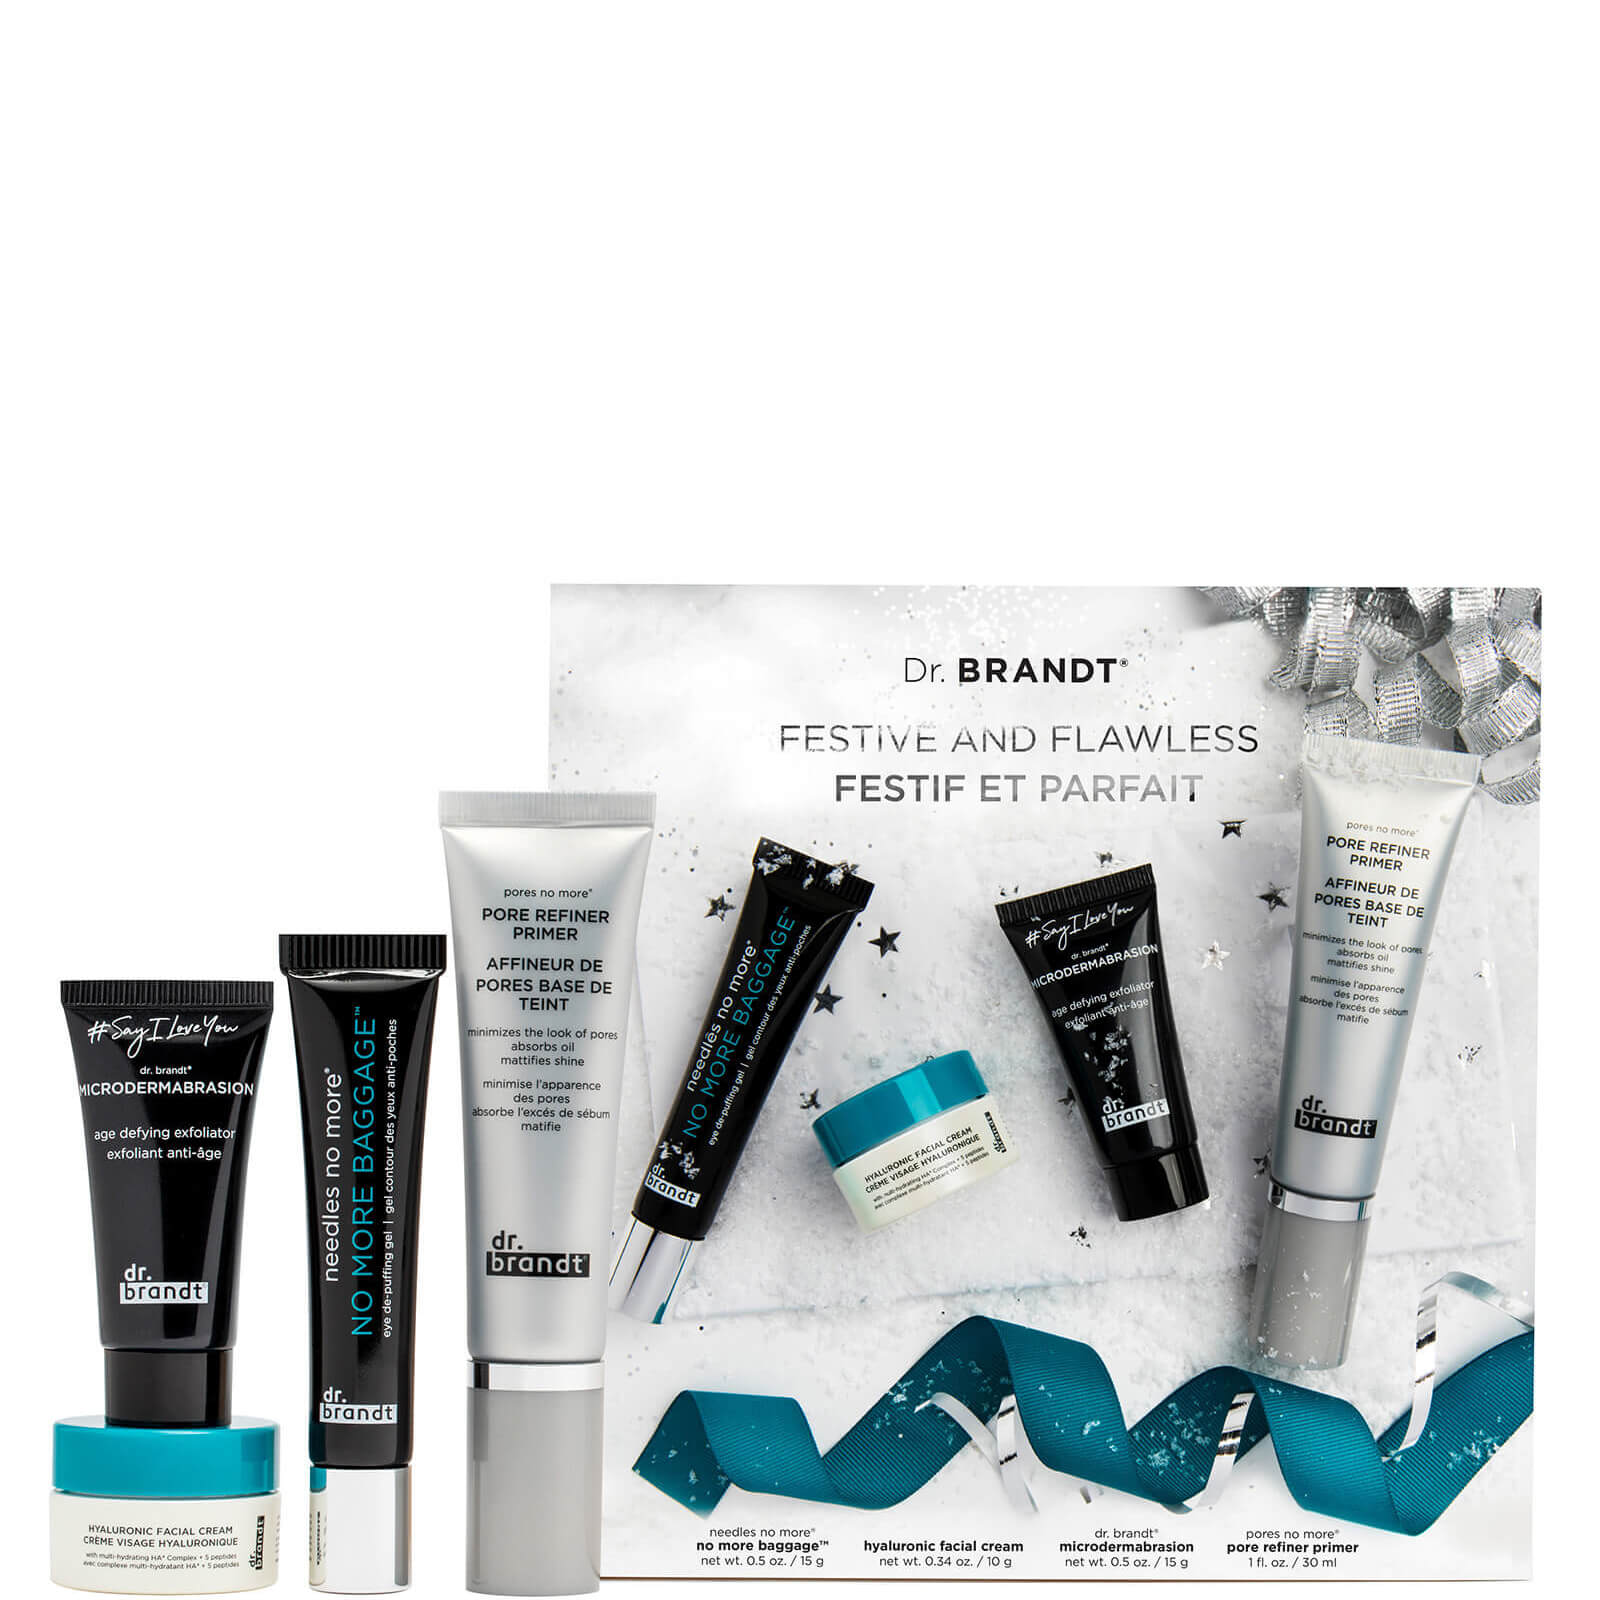 Dr. Brandt Festive and Flawless Kit